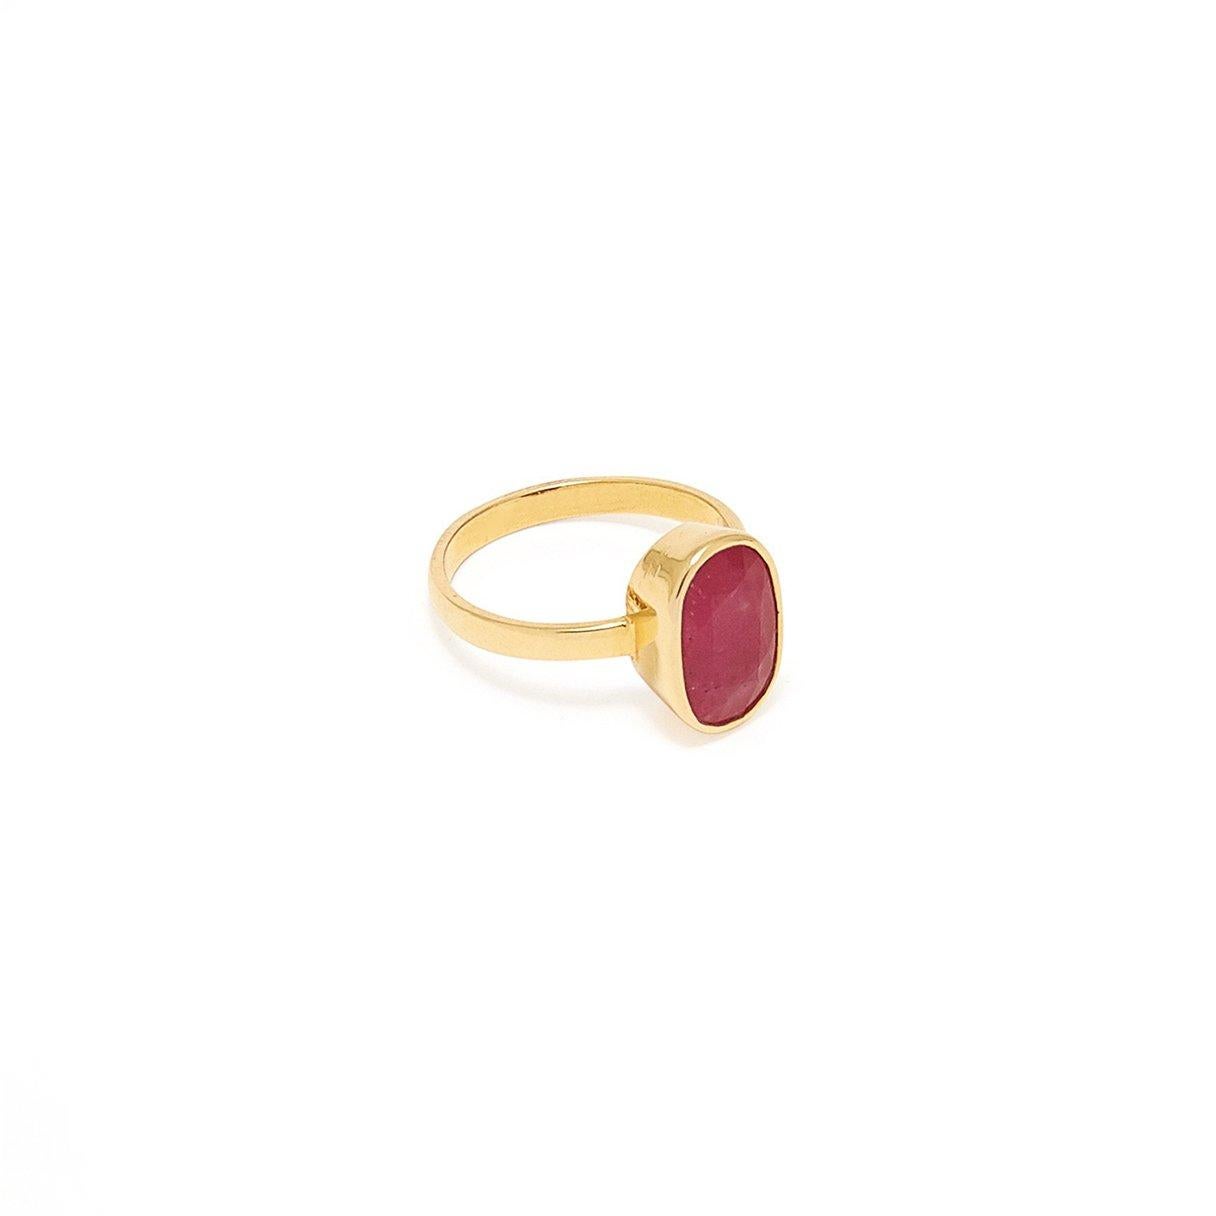 The Ruby, which corresponds to the Sun in Vedic Astrology, is interpreted here with a beautiful pinkish red Ruby in a band crafted of 18 karat gold.

- Natural Ruby weight approx 4.75 Carats.    
- Set in 18 Karat Gold.

According to Vedic